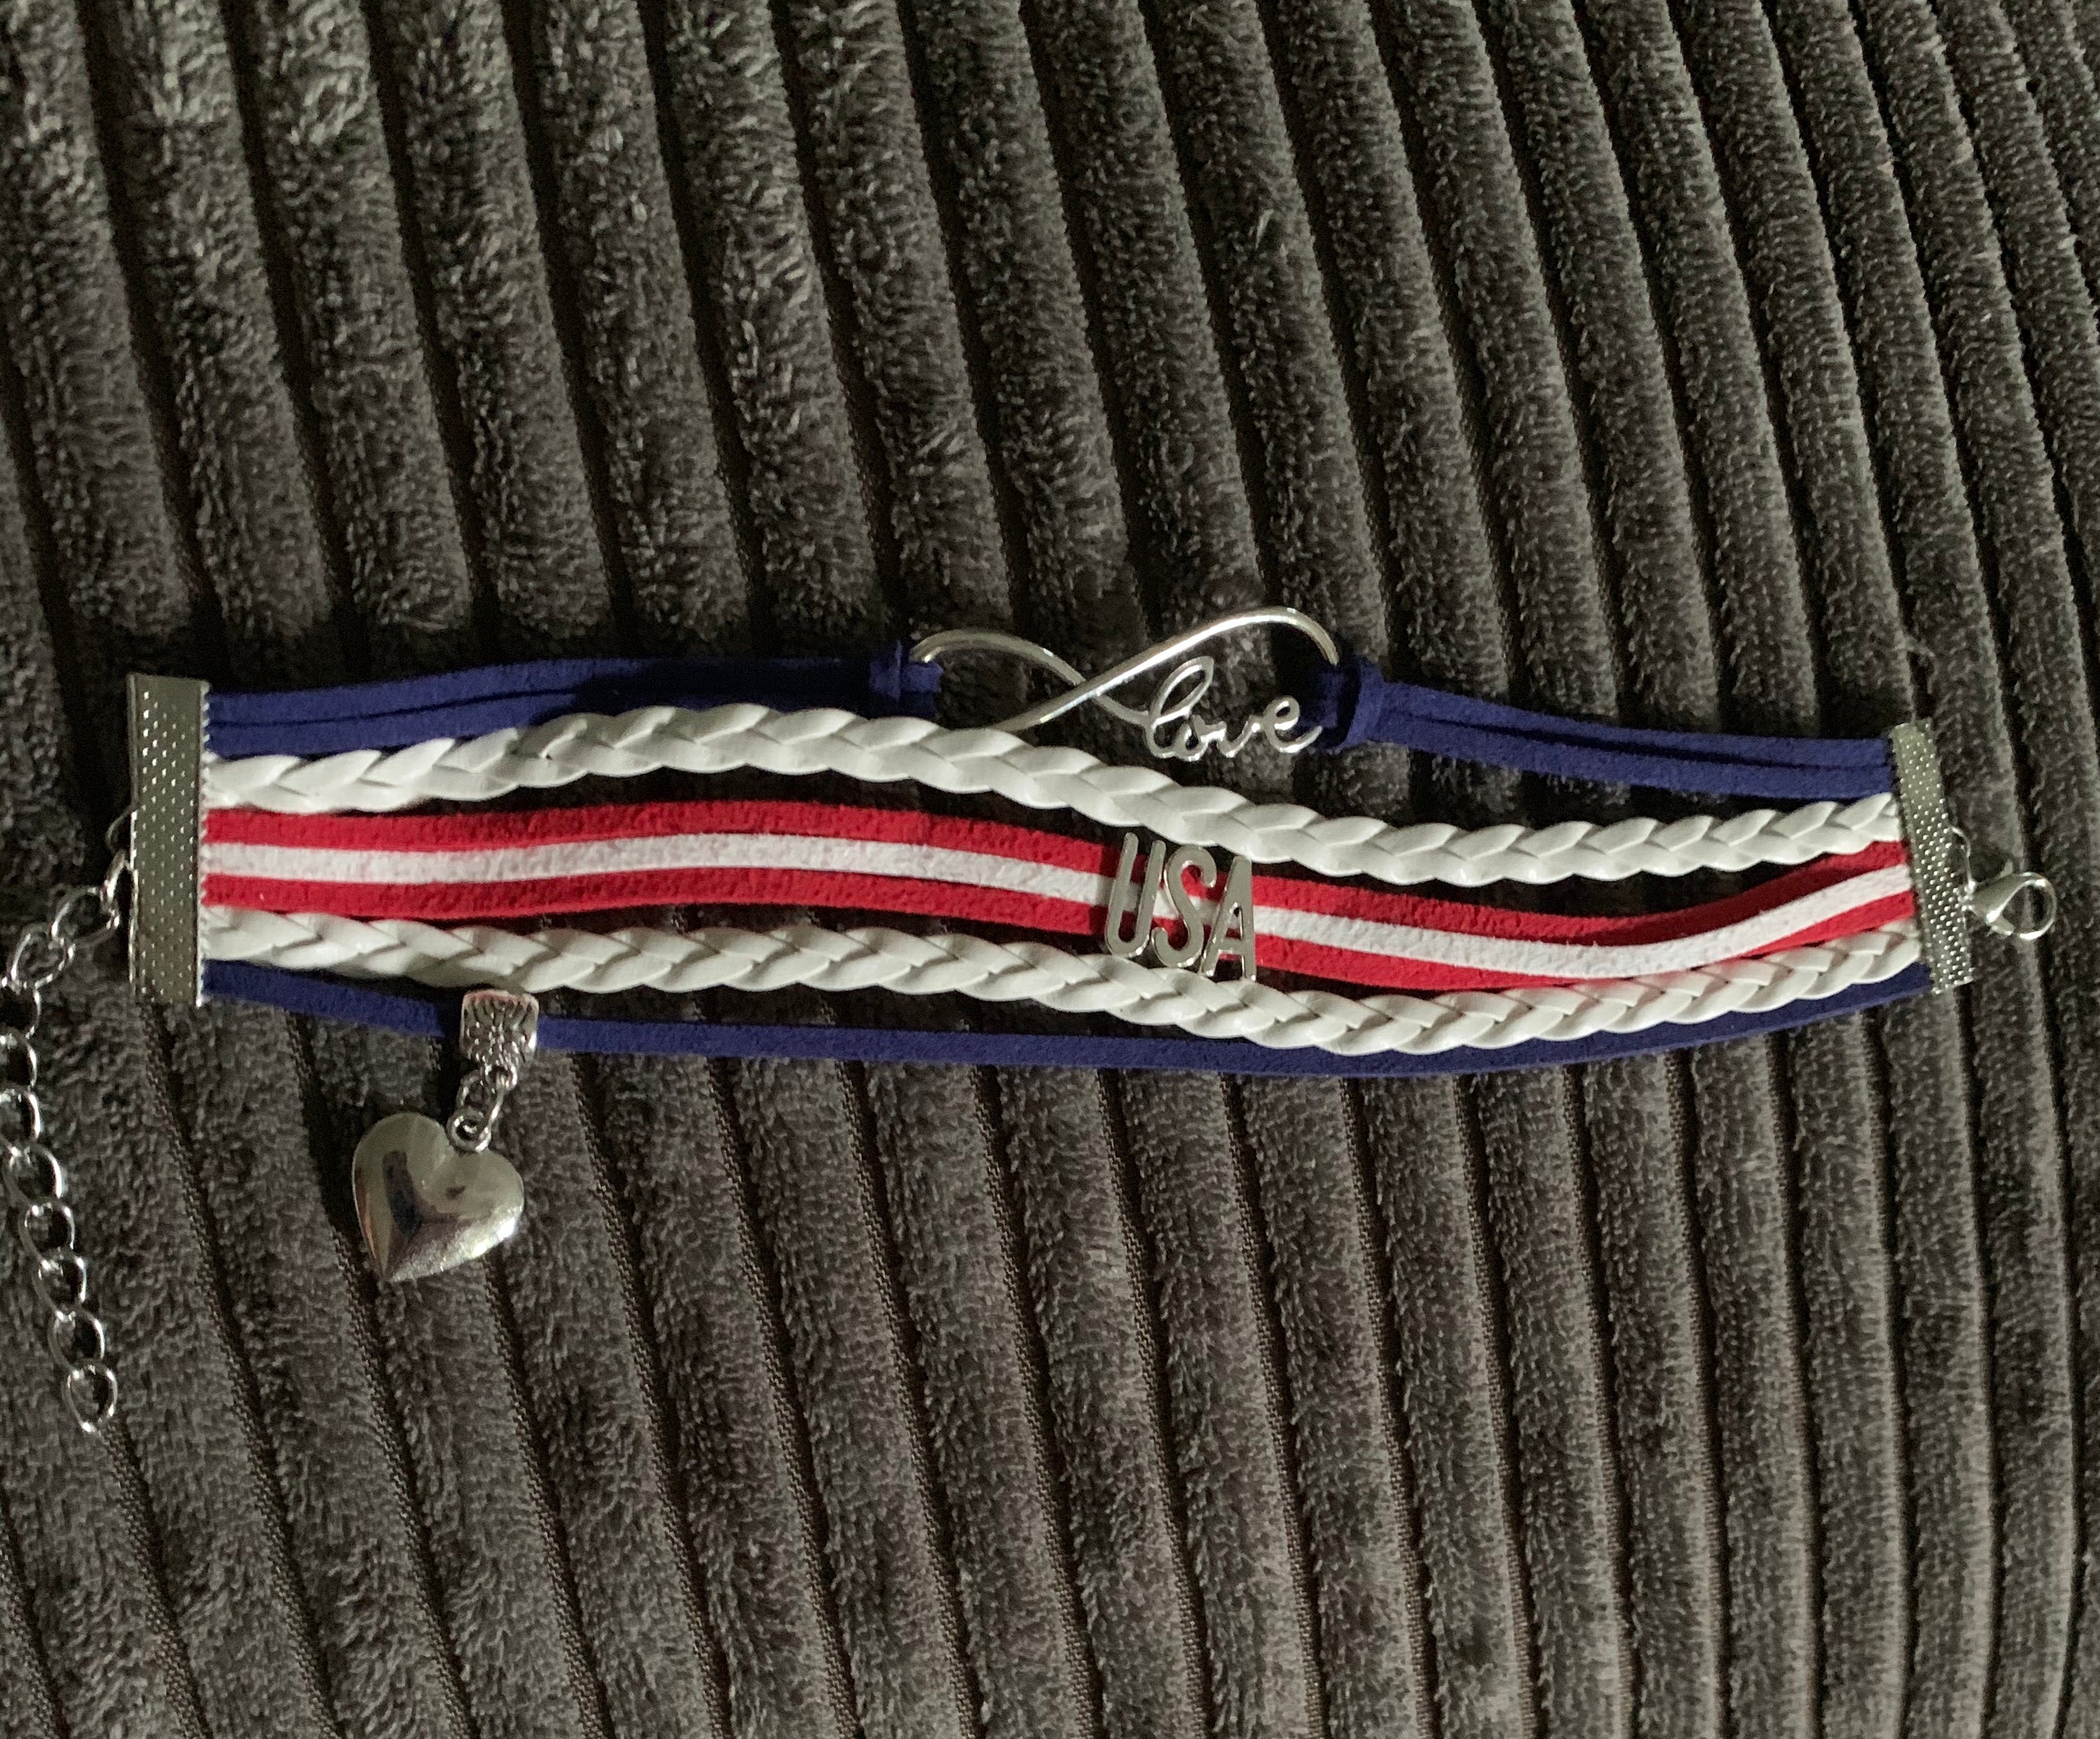 USA patriotic bracelet made with 5 bands connected with silver clasps to make a one piece bracelet. Bands contain braided and straight strings or ribbon adorned with metal attachments like USA lettering and a dangling silver heart. Very nice quality bracelet.  Clasp chain can adjust for sizing. 